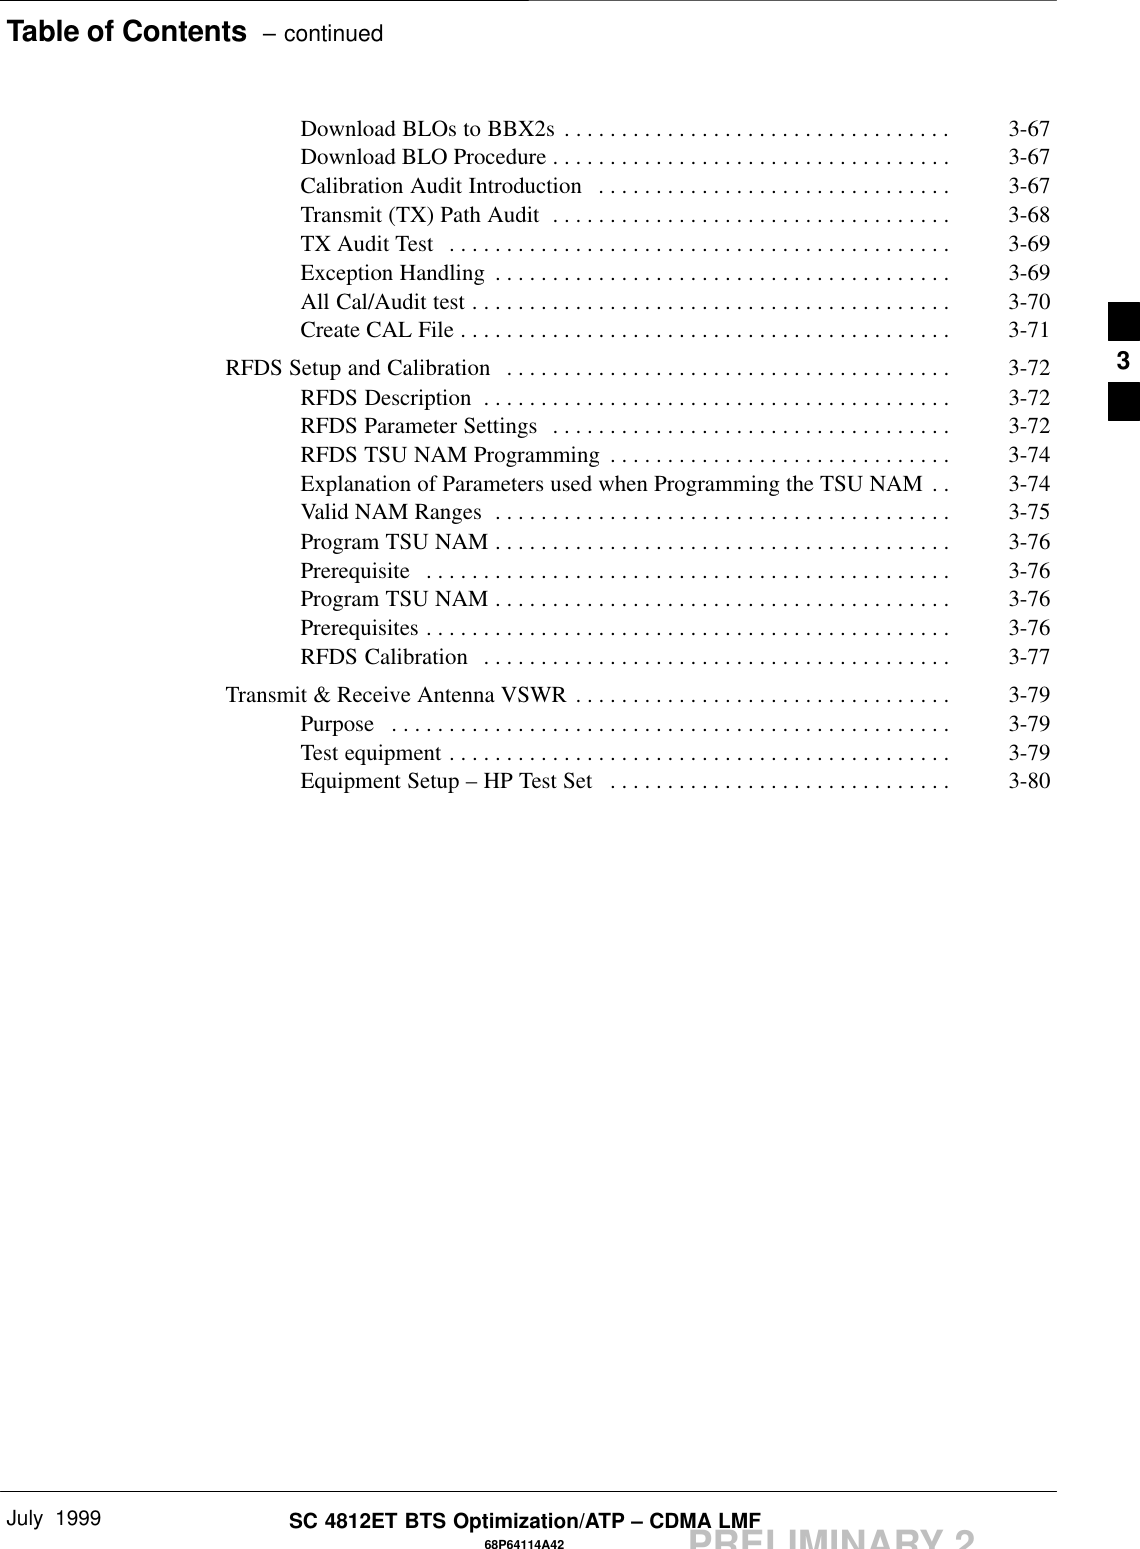 Table of Contents  – continuedJuly  199968P64114A42SC 4812ET BTS Optimization/ATP – CDMA LMFPRELIMINARY 2Download BLOs to BBX2s 3-67. . . . . . . . . . . . . . . . . . . . . . . . . . . . . . . . . . Download BLO Procedure 3-67. . . . . . . . . . . . . . . . . . . . . . . . . . . . . . . . . . . Calibration Audit Introduction 3-67. . . . . . . . . . . . . . . . . . . . . . . . . . . . . . . Transmit (TX) Path Audit 3-68. . . . . . . . . . . . . . . . . . . . . . . . . . . . . . . . . . . TX Audit Test 3-69. . . . . . . . . . . . . . . . . . . . . . . . . . . . . . . . . . . . . . . . . . . . Exception Handling 3-69. . . . . . . . . . . . . . . . . . . . . . . . . . . . . . . . . . . . . . . . All Cal/Audit test 3-70. . . . . . . . . . . . . . . . . . . . . . . . . . . . . . . . . . . . . . . . . . Create CAL File 3-71. . . . . . . . . . . . . . . . . . . . . . . . . . . . . . . . . . . . . . . . . . . RFDS Setup and Calibration 3-72. . . . . . . . . . . . . . . . . . . . . . . . . . . . . . . . . . . . . . . RFDS Description 3-72. . . . . . . . . . . . . . . . . . . . . . . . . . . . . . . . . . . . . . . . . RFDS Parameter Settings 3-72. . . . . . . . . . . . . . . . . . . . . . . . . . . . . . . . . . . RFDS TSU NAM Programming 3-74. . . . . . . . . . . . . . . . . . . . . . . . . . . . . . Explanation of Parameters used when Programming the TSU NAM 3-74. . Valid NAM Ranges 3-75. . . . . . . . . . . . . . . . . . . . . . . . . . . . . . . . . . . . . . . . Program TSU NAM 3-76. . . . . . . . . . . . . . . . . . . . . . . . . . . . . . . . . . . . . . . . Prerequisite 3-76. . . . . . . . . . . . . . . . . . . . . . . . . . . . . . . . . . . . . . . . . . . . . . Program TSU NAM 3-76. . . . . . . . . . . . . . . . . . . . . . . . . . . . . . . . . . . . . . . . Prerequisites 3-76. . . . . . . . . . . . . . . . . . . . . . . . . . . . . . . . . . . . . . . . . . . . . . RFDS Calibration 3-77. . . . . . . . . . . . . . . . . . . . . . . . . . . . . . . . . . . . . . . . . Transmit &amp; Receive Antenna VSWR 3-79. . . . . . . . . . . . . . . . . . . . . . . . . . . . . . . . . Purpose 3-79. . . . . . . . . . . . . . . . . . . . . . . . . . . . . . . . . . . . . . . . . . . . . . . . . Test equipment 3-79. . . . . . . . . . . . . . . . . . . . . . . . . . . . . . . . . . . . . . . . . . . . Equipment Setup – HP Test Set  3-80. . . . . . . . . . . . . . . . . . . . . . . . . . . . . . 3